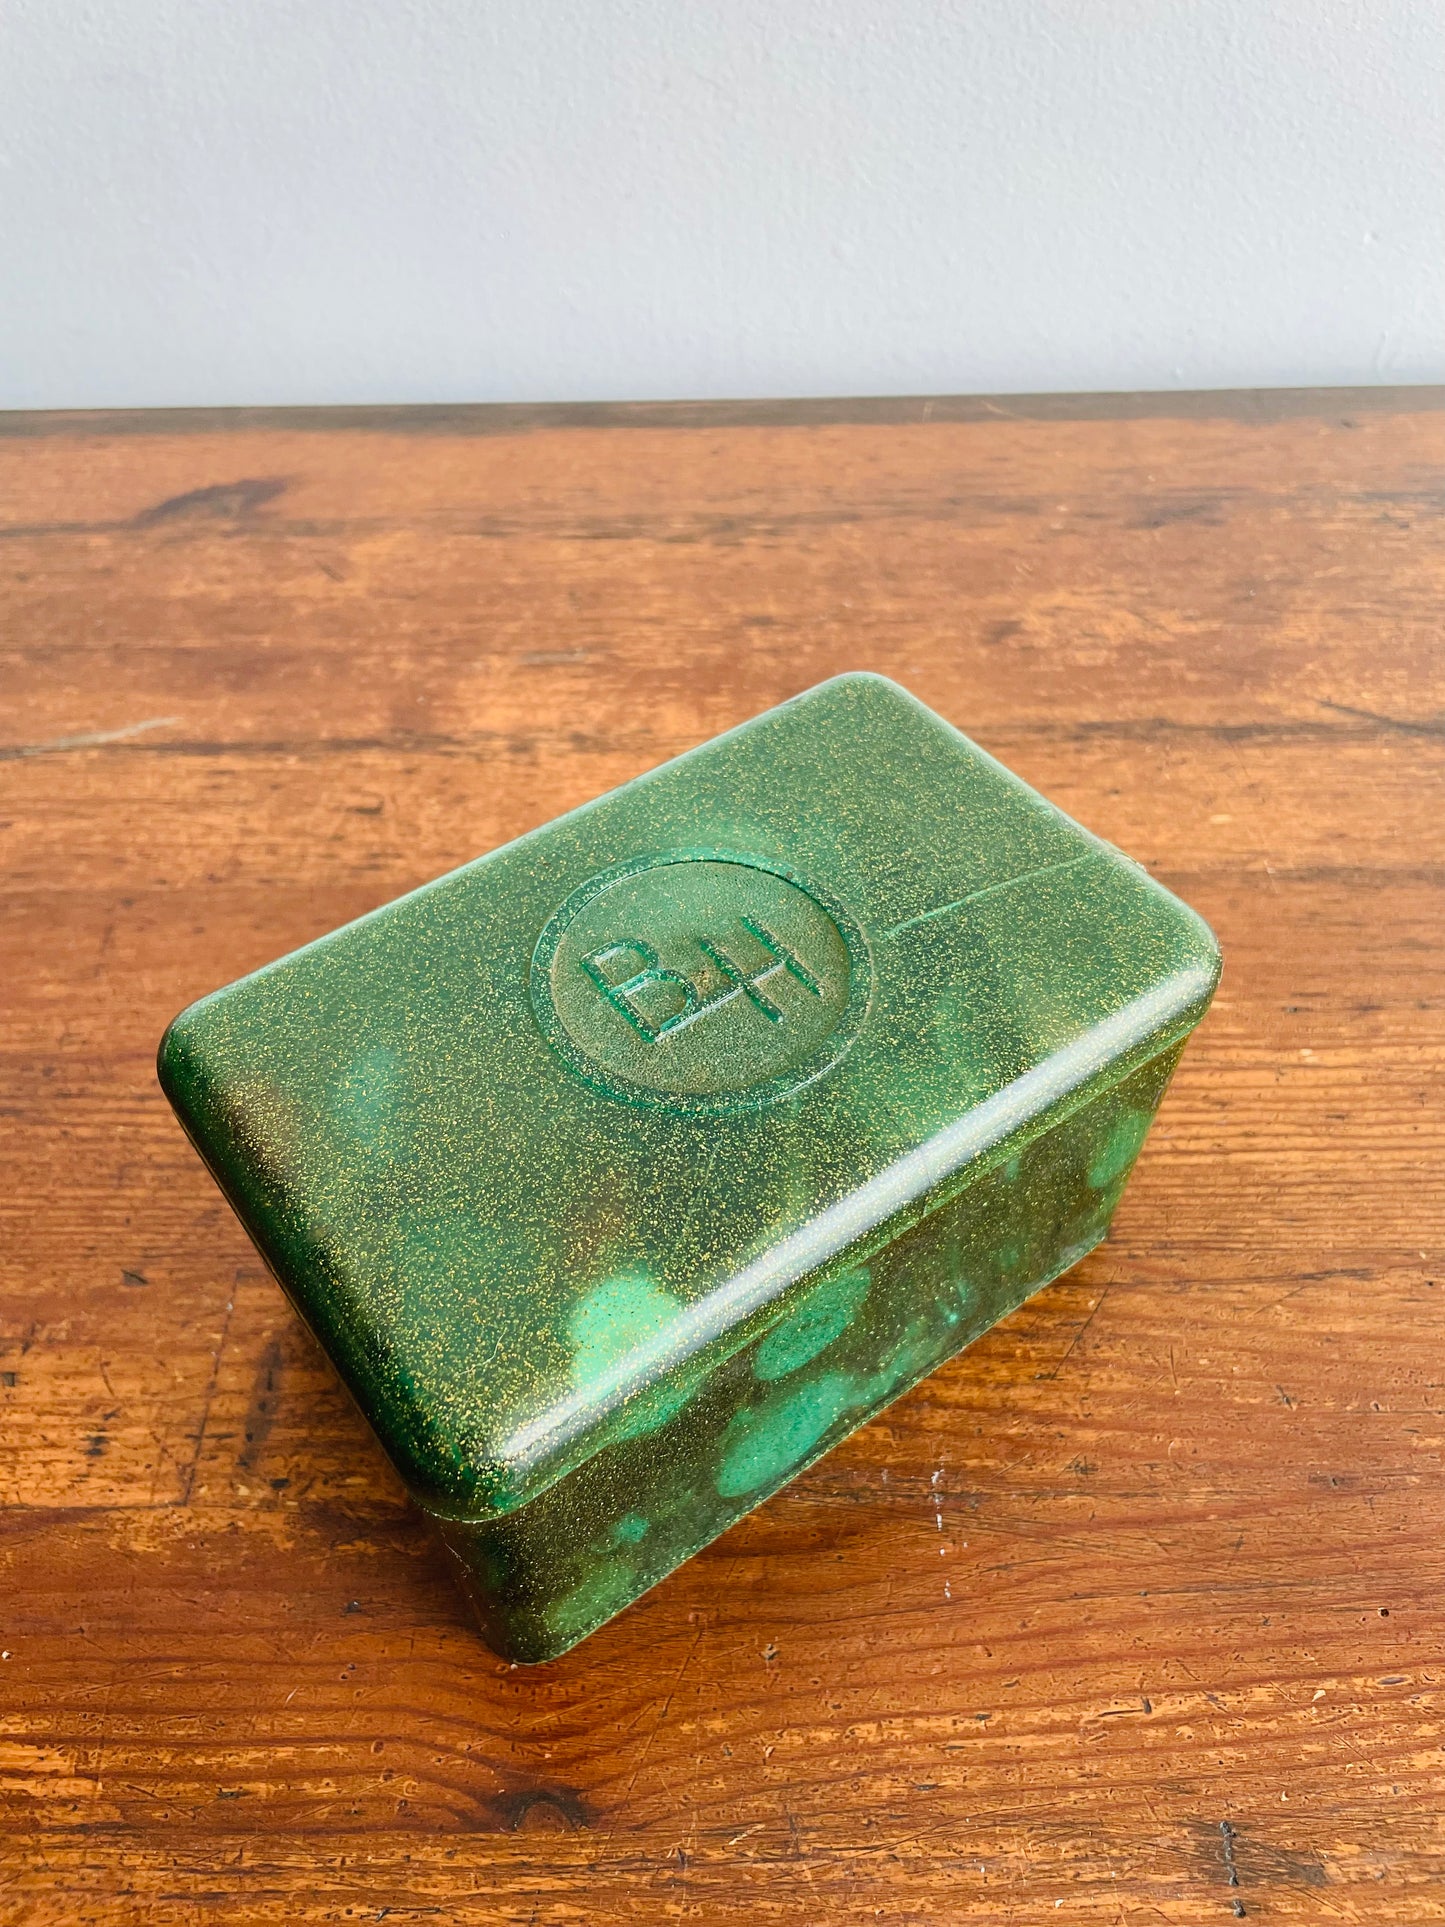 Mystery Button Box - 1970s Benson & Hedges Canada Tobacco Case filled with Vintage Buttons